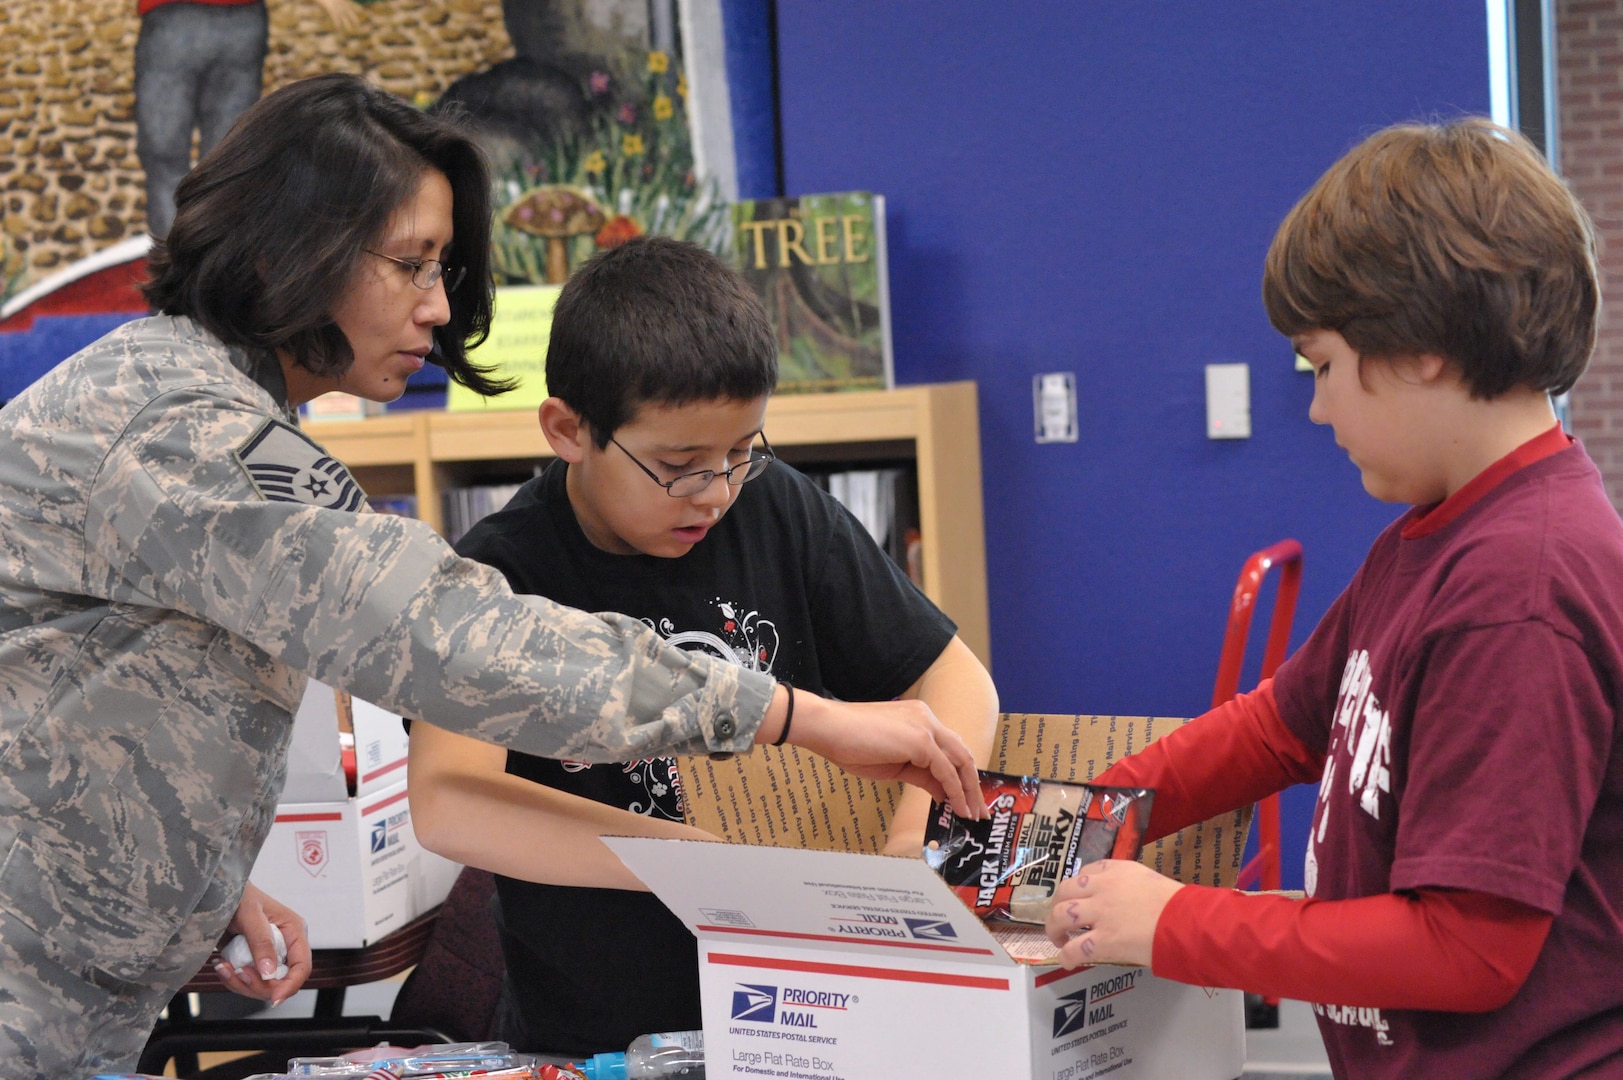 Master Sgt Karla Iglesias, Airman and Family Readiness Center NCO in charge, works with Matthew Avila, Schlather Intermediate School fifth-grader, to put together care packages for 35  deployed Joint Base San Antonio servicemembers. Through Operation Shoebox, the students were able to send packages spreading holiday cheer to deployed troops
(U.S. Air Force photo by Airman 1st Class Alexis Siekert)